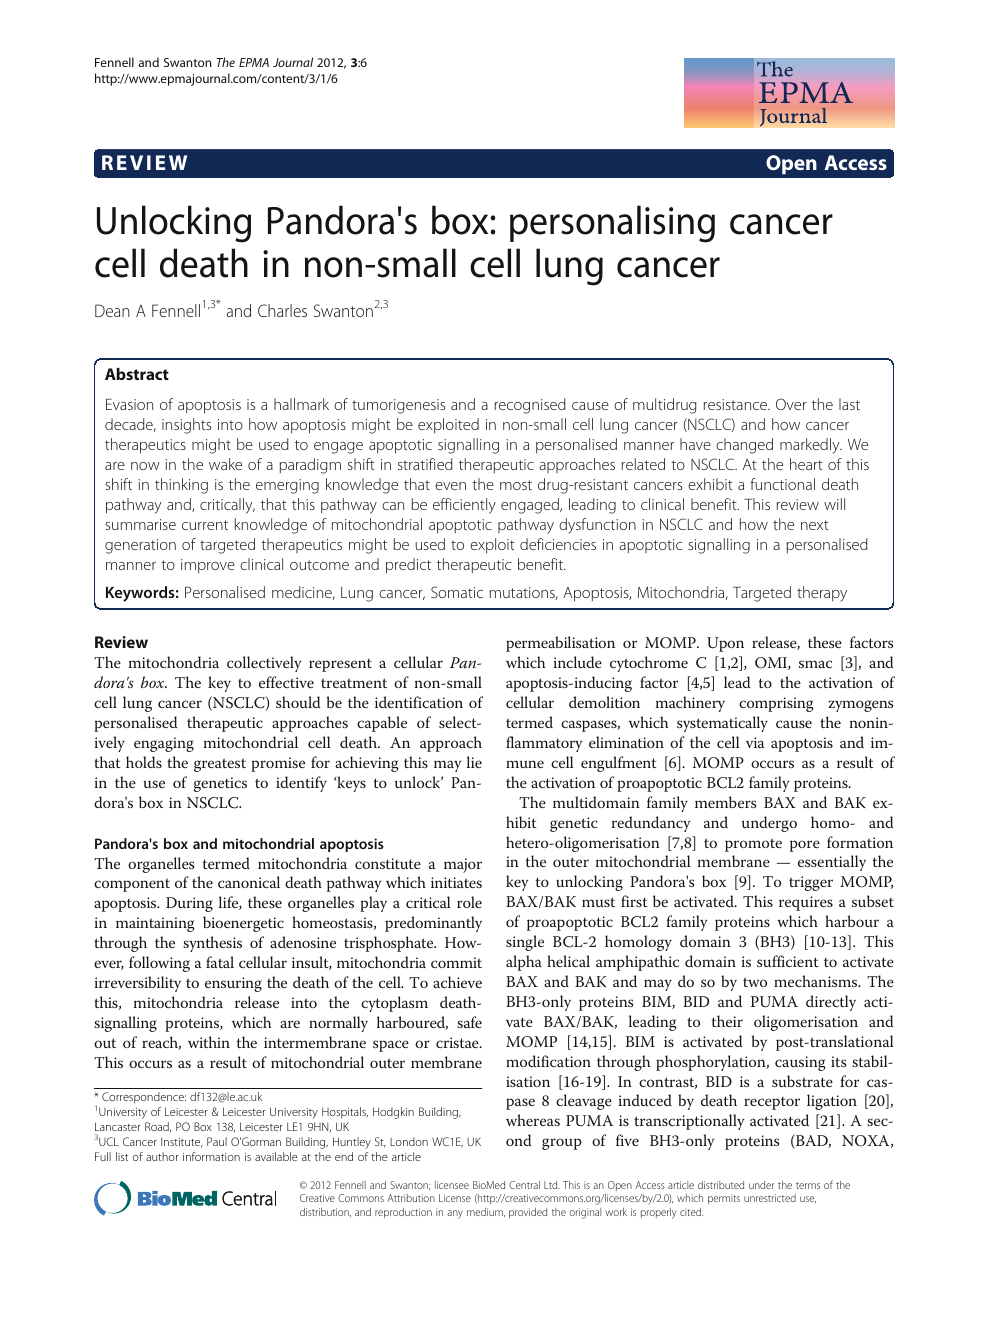 Unlocking Pandora S Box Personalising Cancer Cell Death In Non Small Cell Lung Cancer Topic Of Research Paper In Biological Sciences Download Scholarly Article Pdf And Read For Free On Cyberleninka Open Science